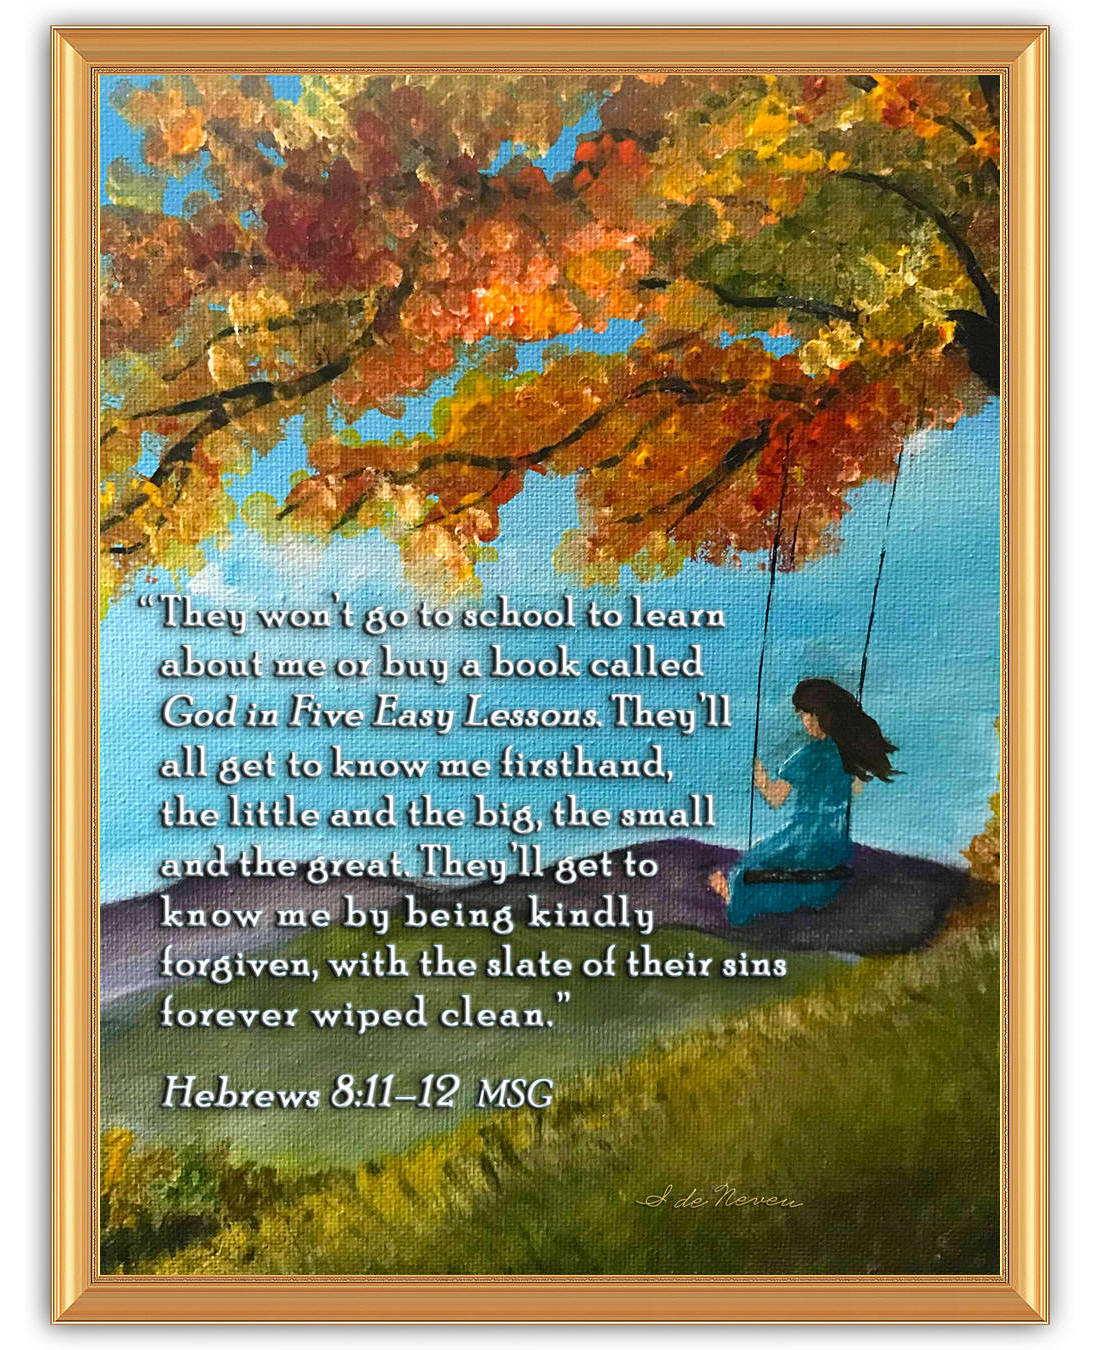 Scripture picture of Hebrews 8:11-12, emphasizing the fact that 'all believers will know the Lord.'